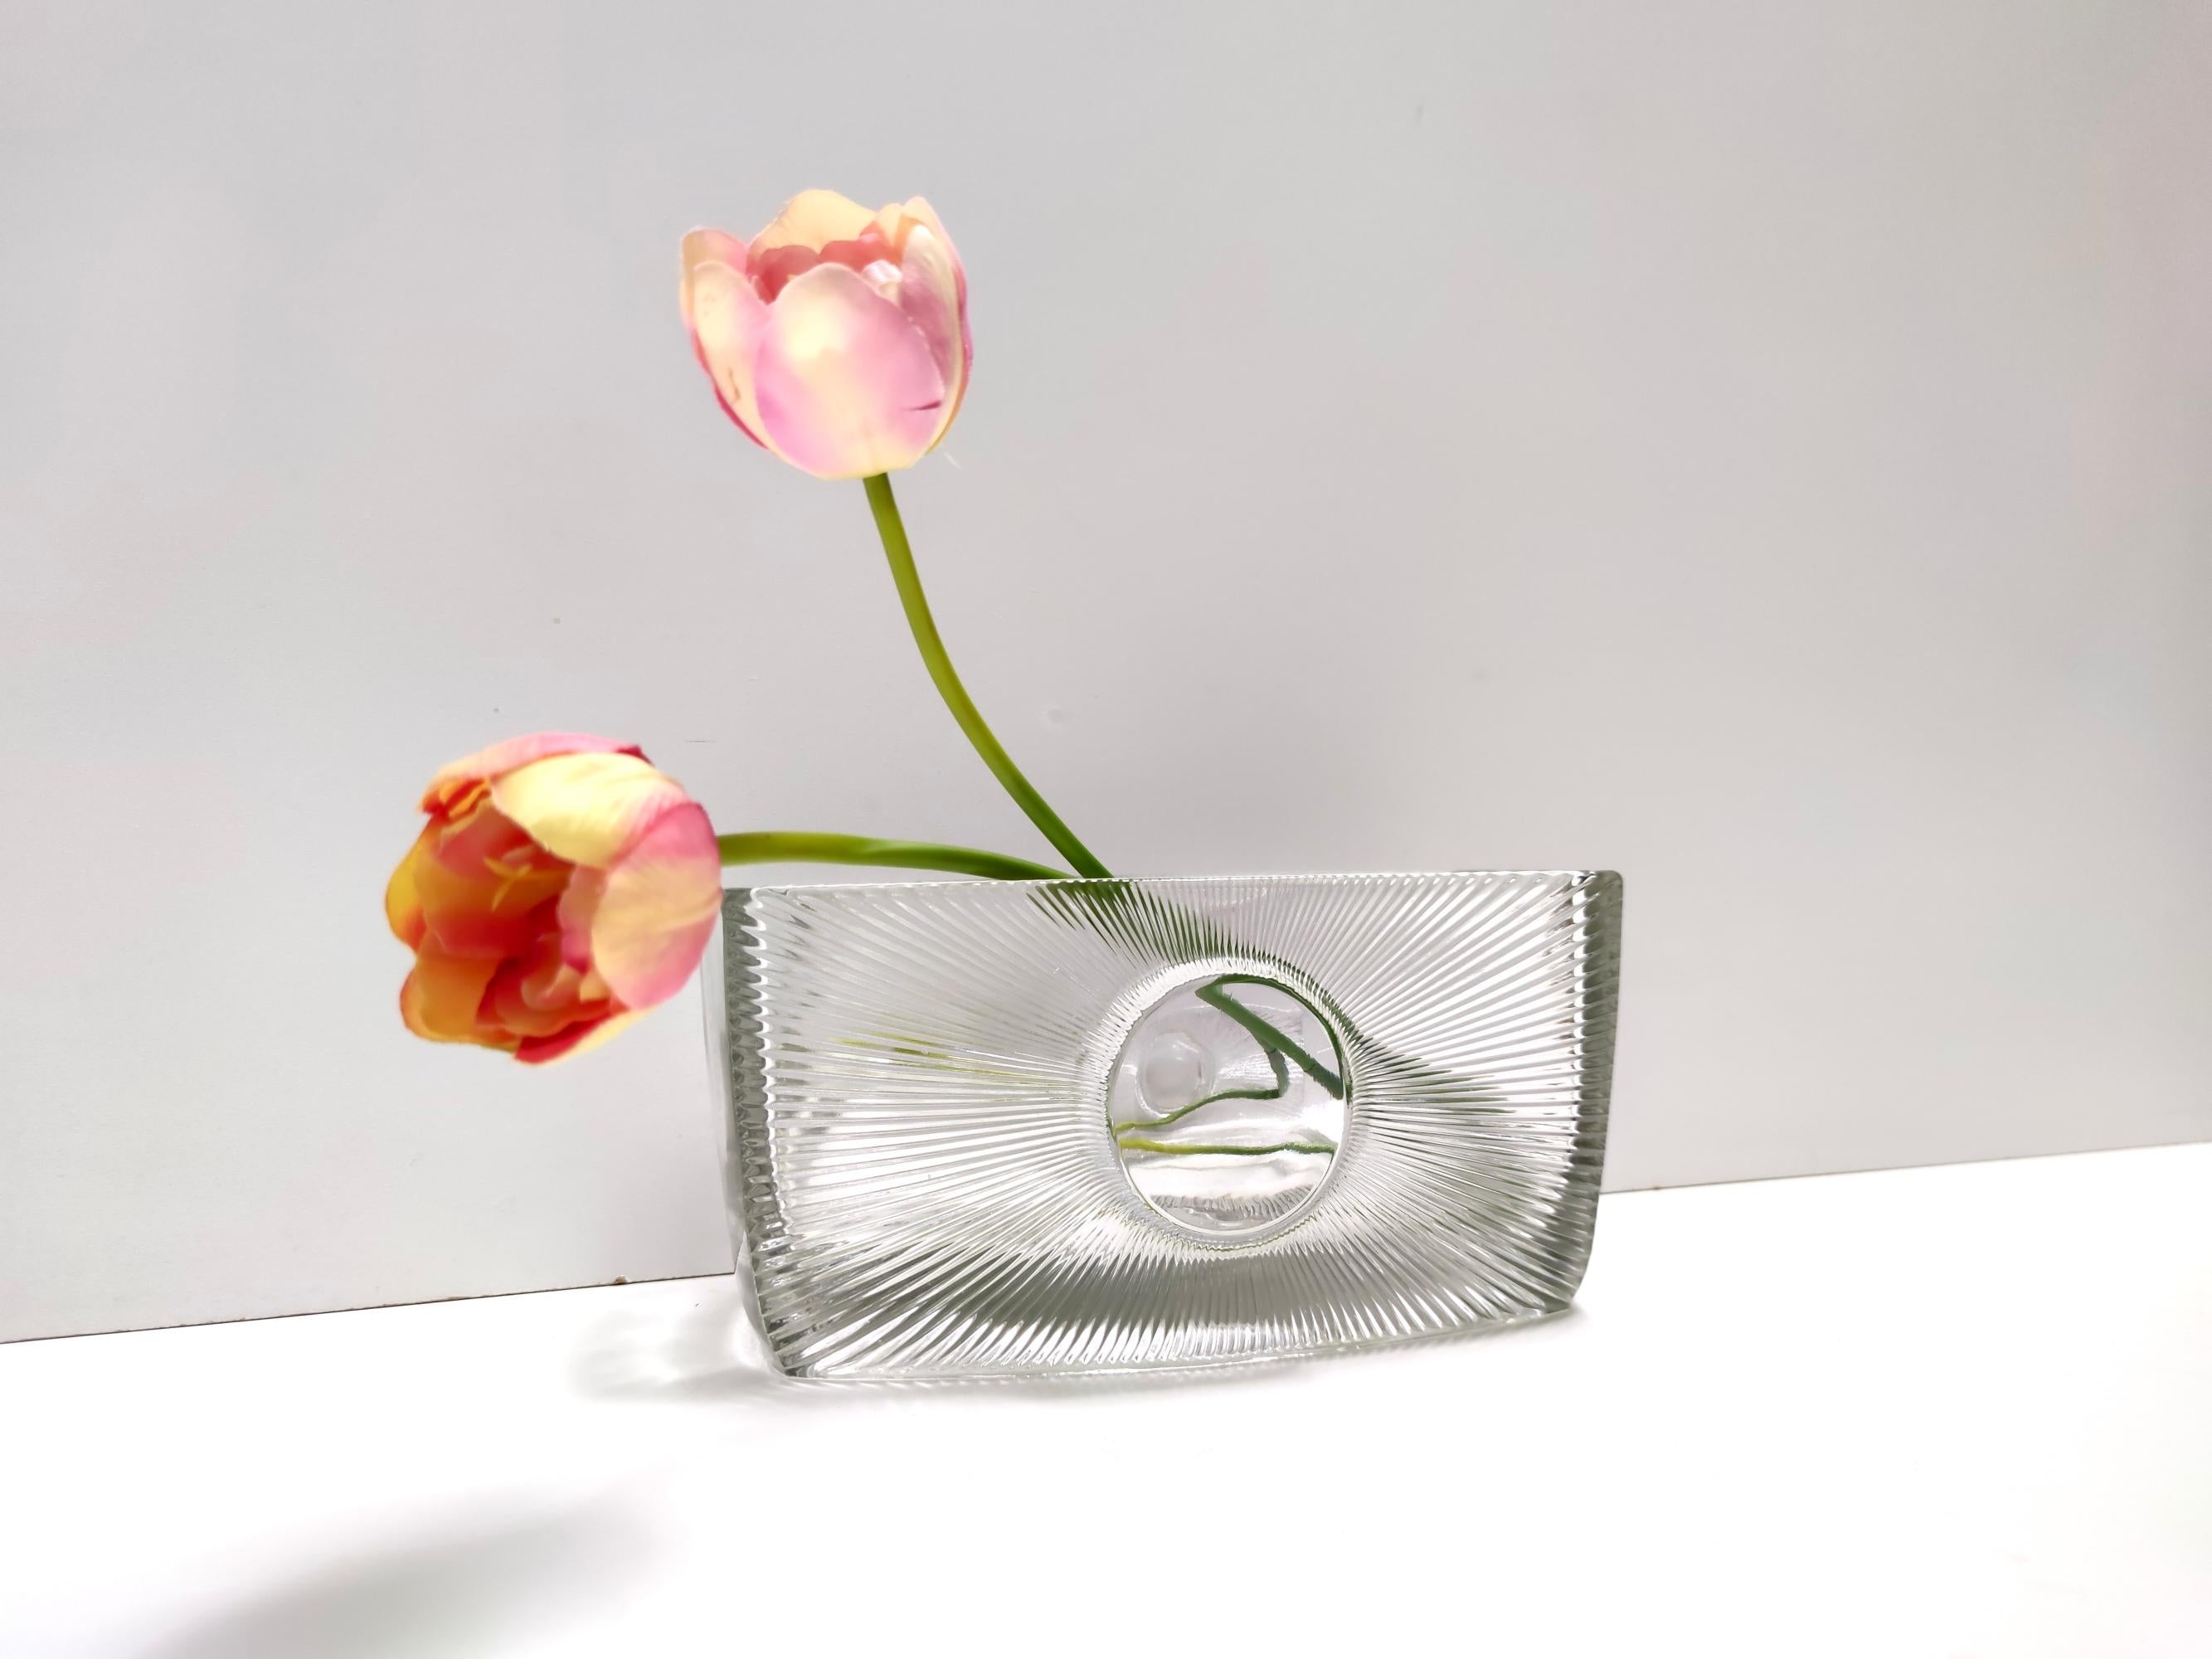 Made in Czech Republich.
In 1969 Rudolf Jurnikl designed this pressed glass piece for Sklárna Libochovice.
His design has dynamic forms and lively curves. In 70s Jurnikl used a floral design.
Iconic for his work is this vase, called SUN and later